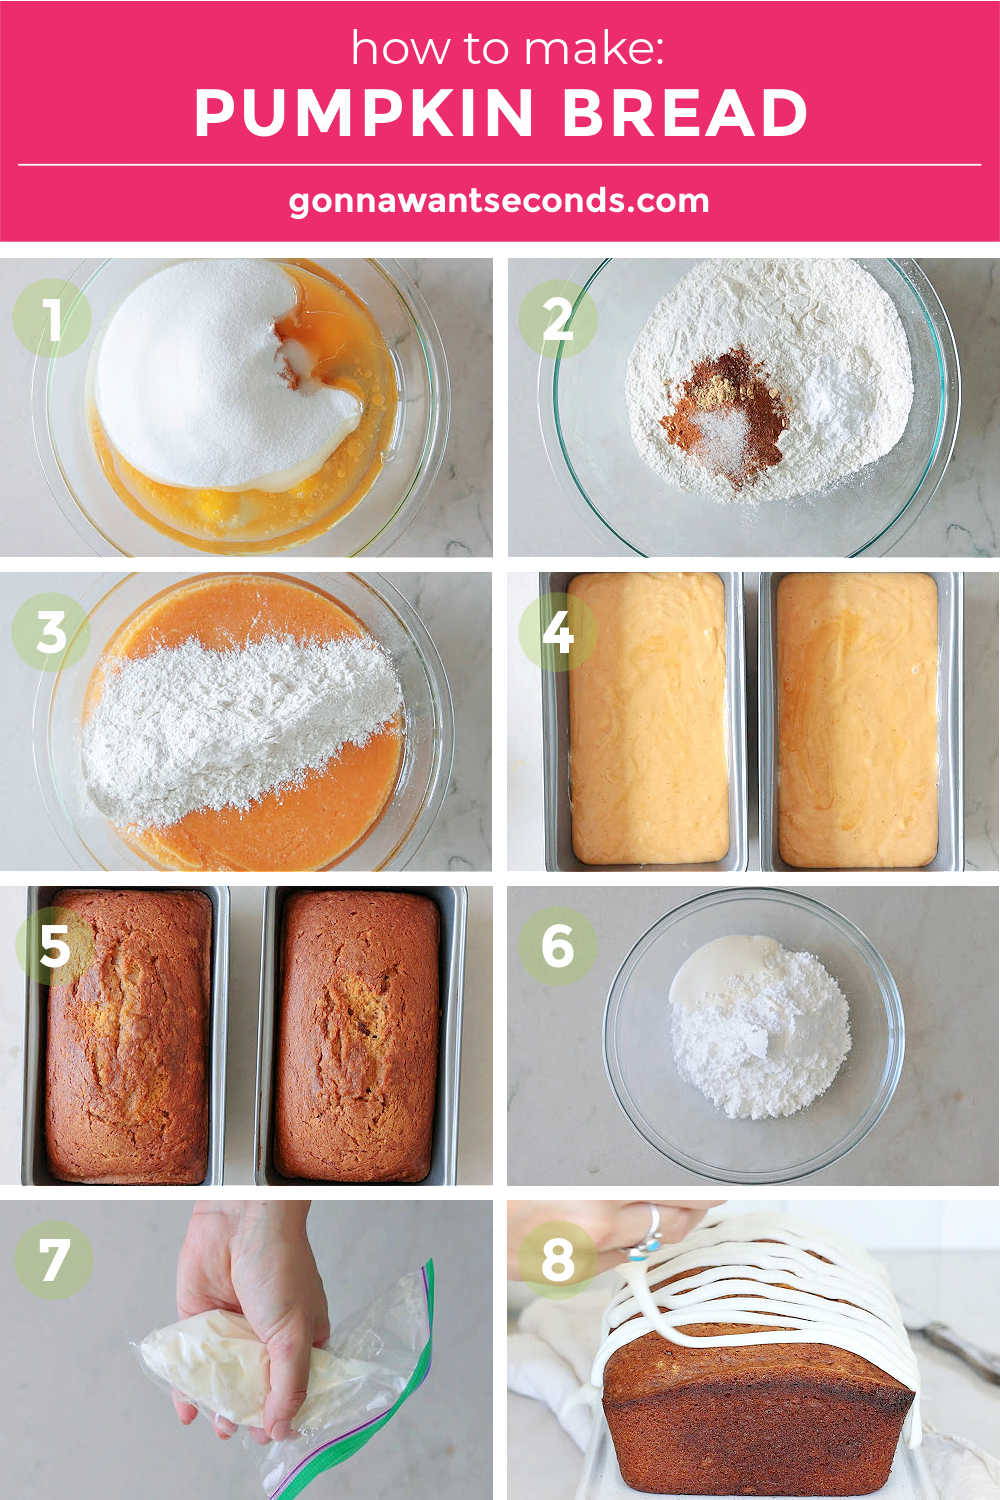 step by step how to make pumpkin bread